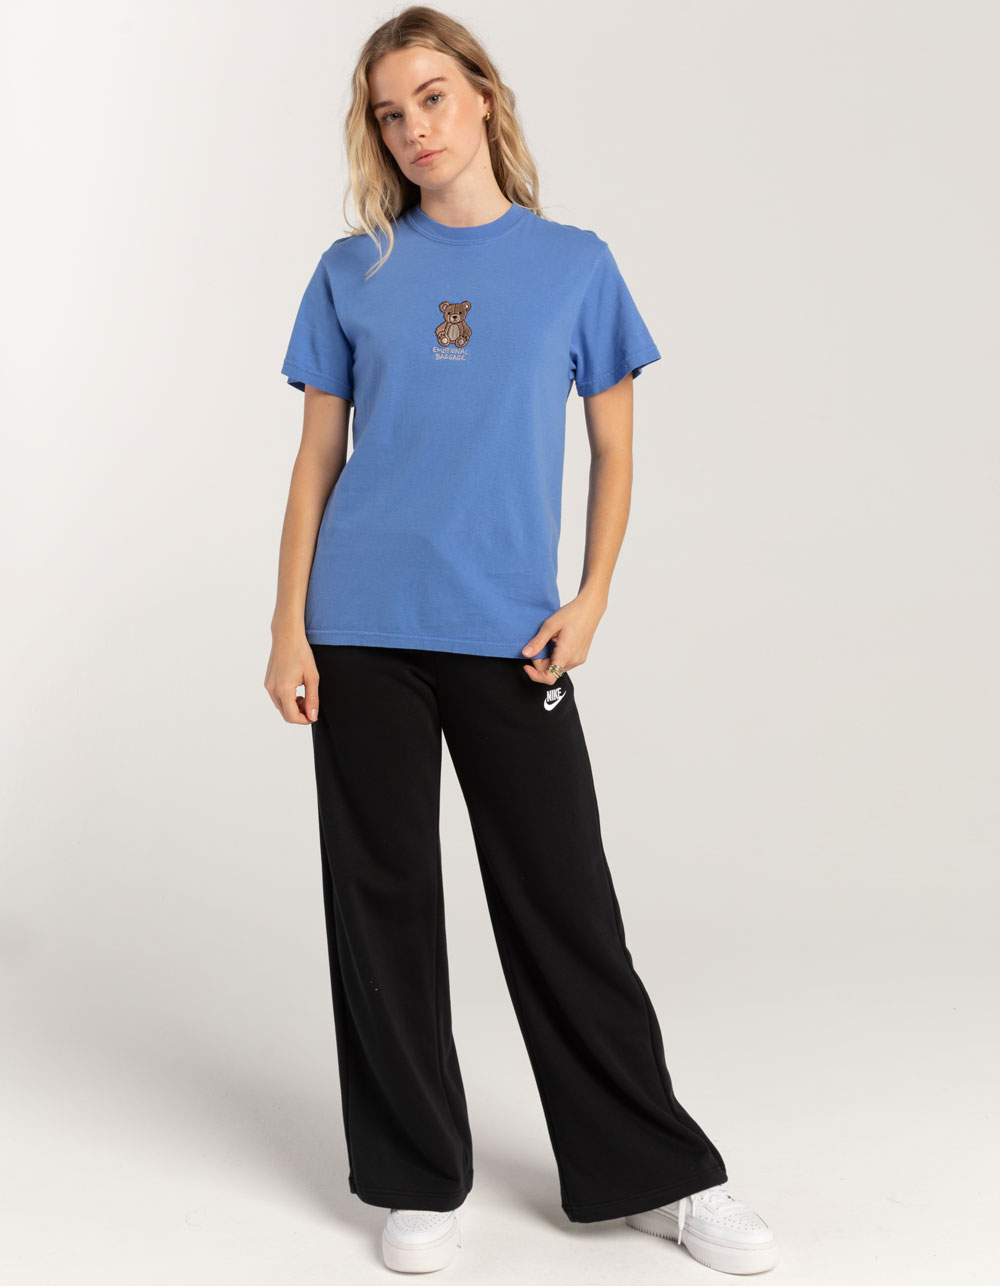 RIOT SOCIETY Emotional Baggage Womens Tee - BLUE | Tillys